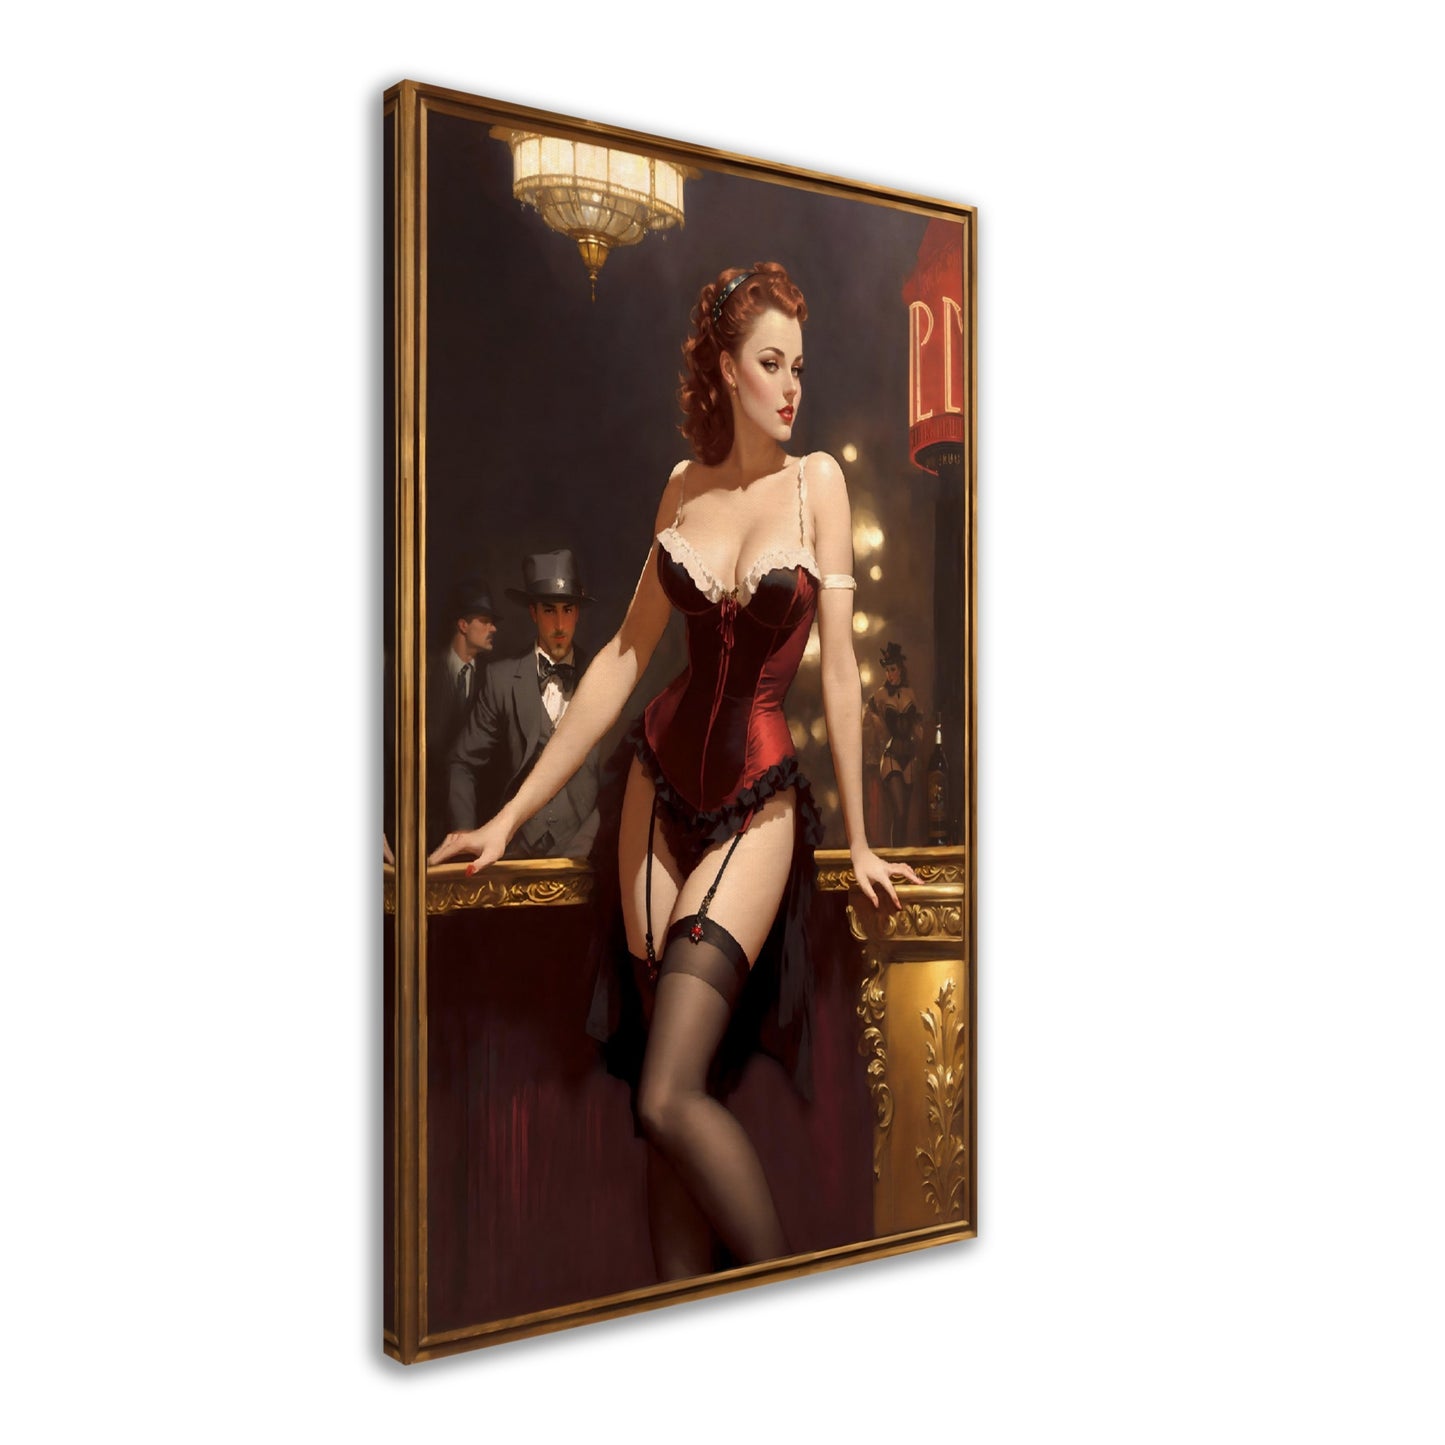 Daily Pinup #62 - Exclusive Club Wall Art